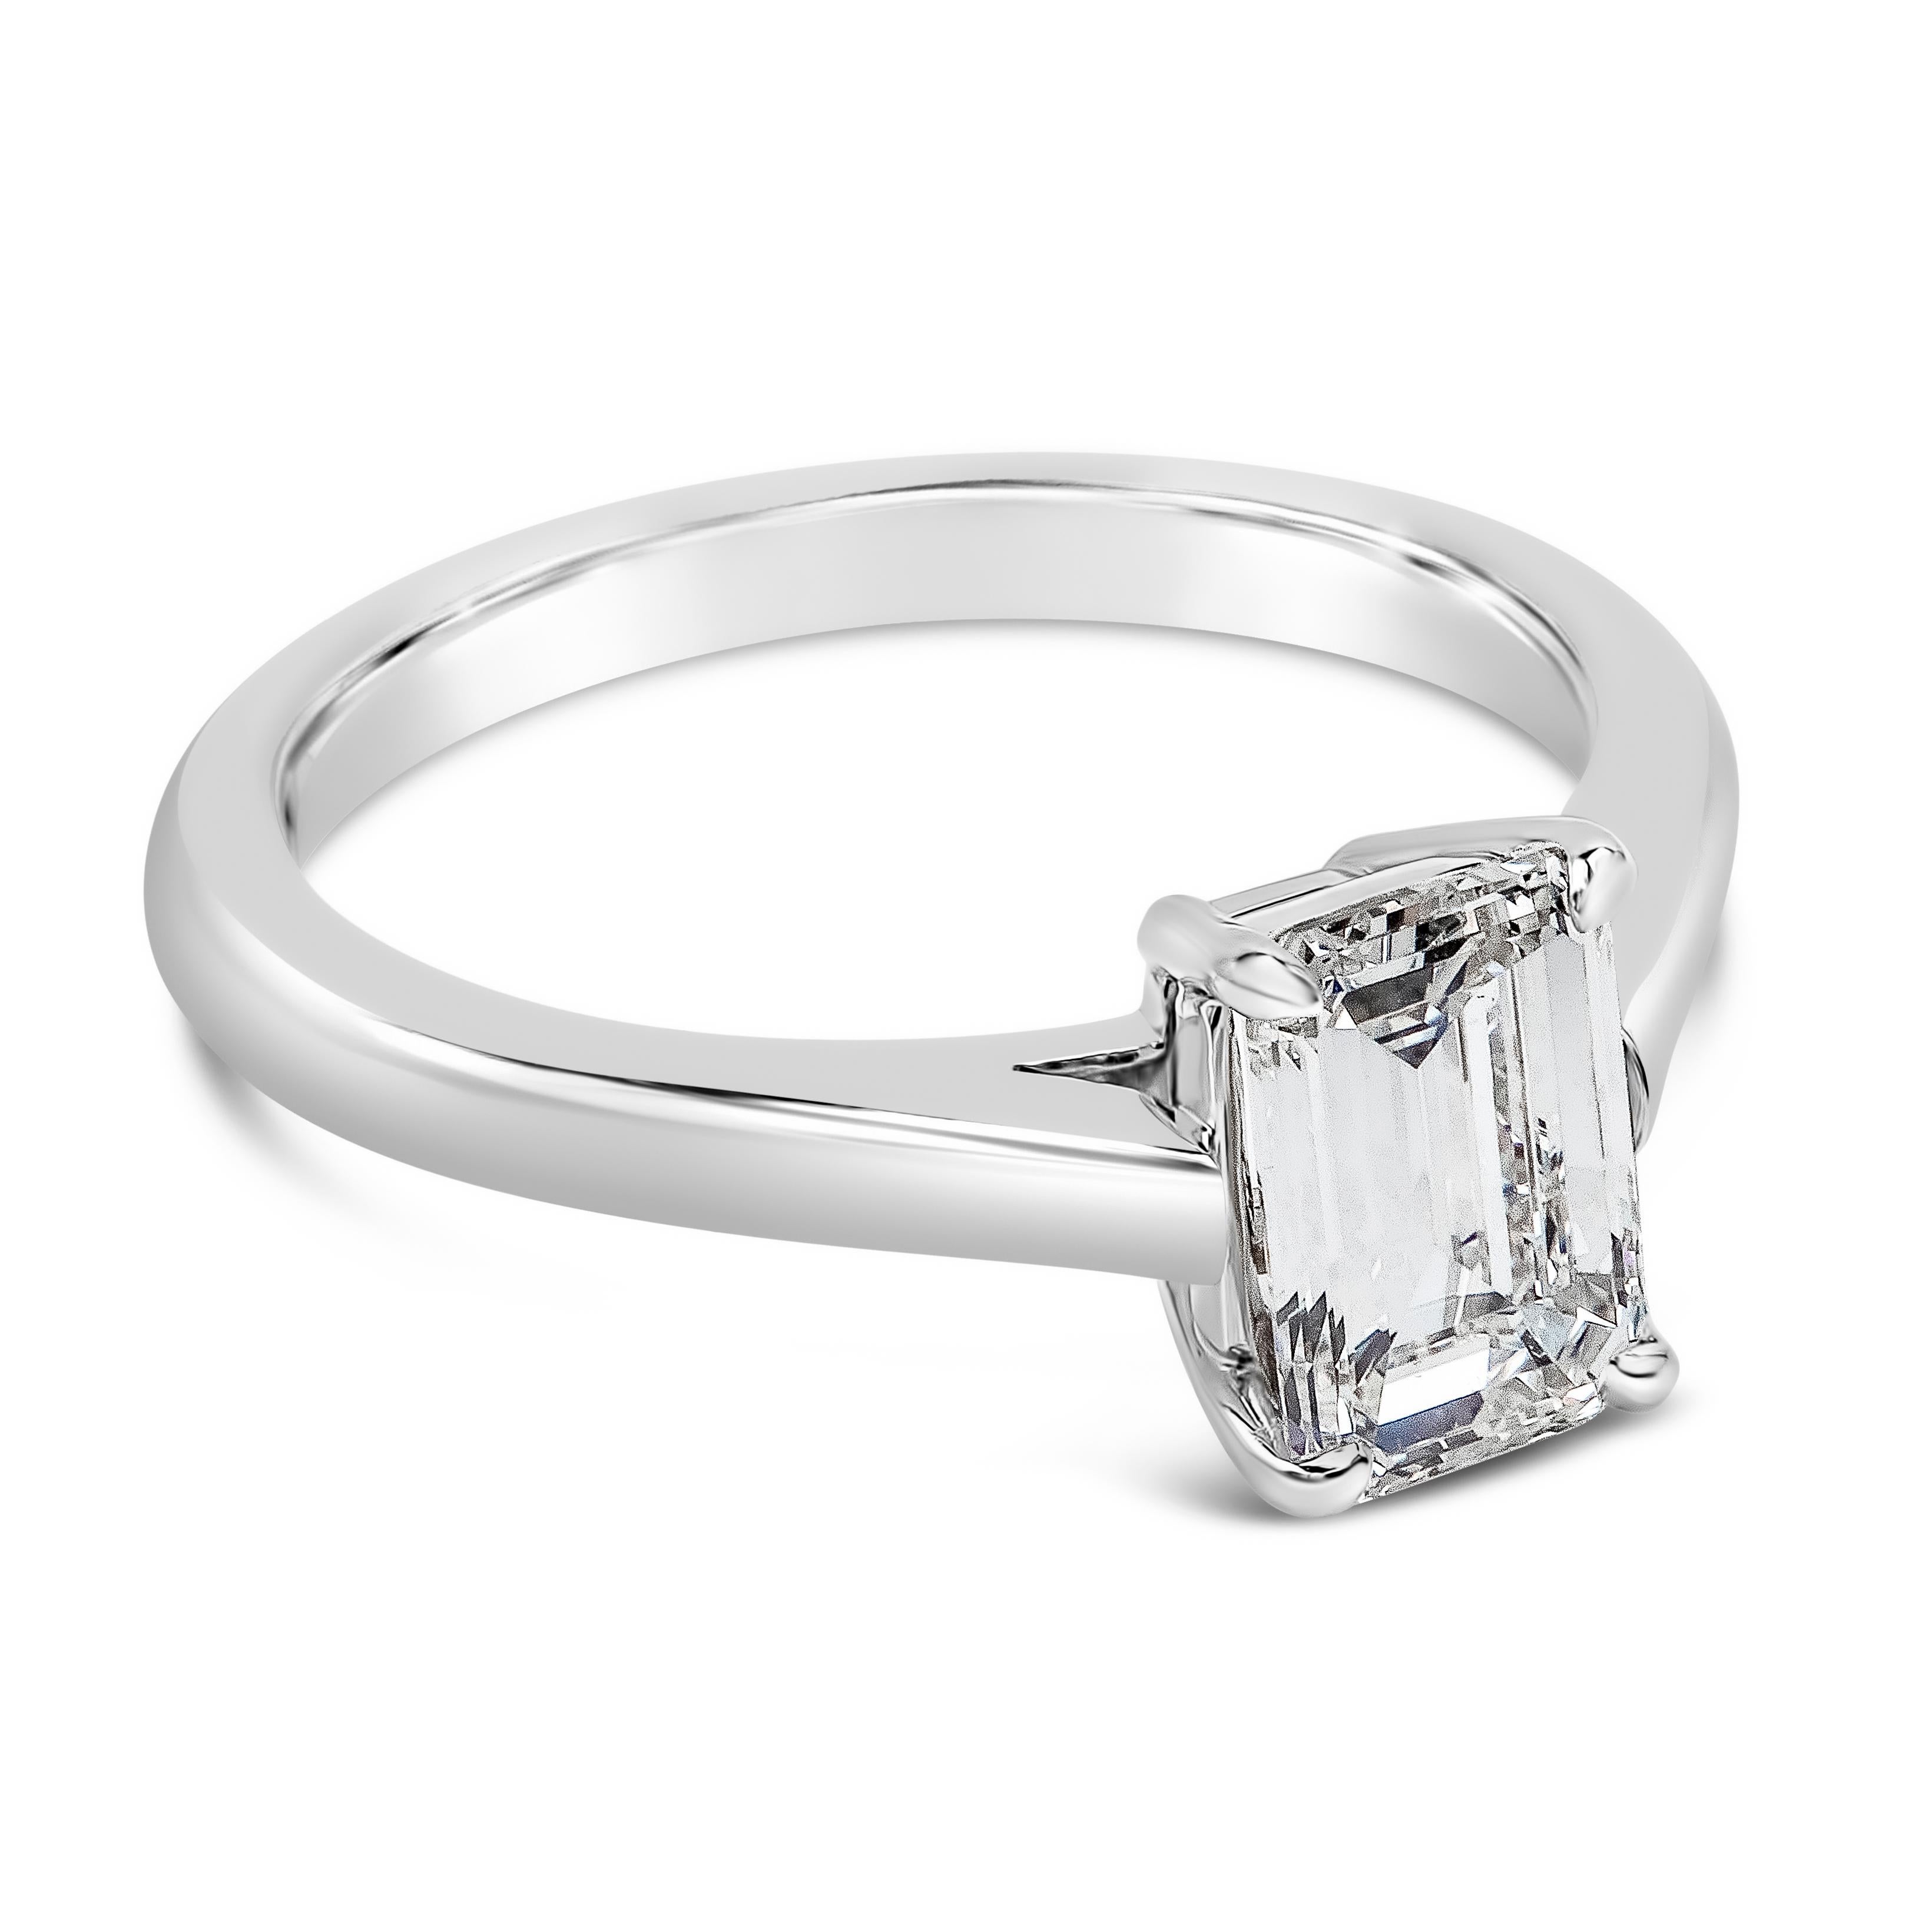 A classy solitaire engagement ring showcasing a 1.27 carats emerald cut diamond certified by GIA as G color and VS1 in clarity, set in a timeless four prong basket setting and a polished platinum mounting. Size 6.25 US resizable upon request.

Roman